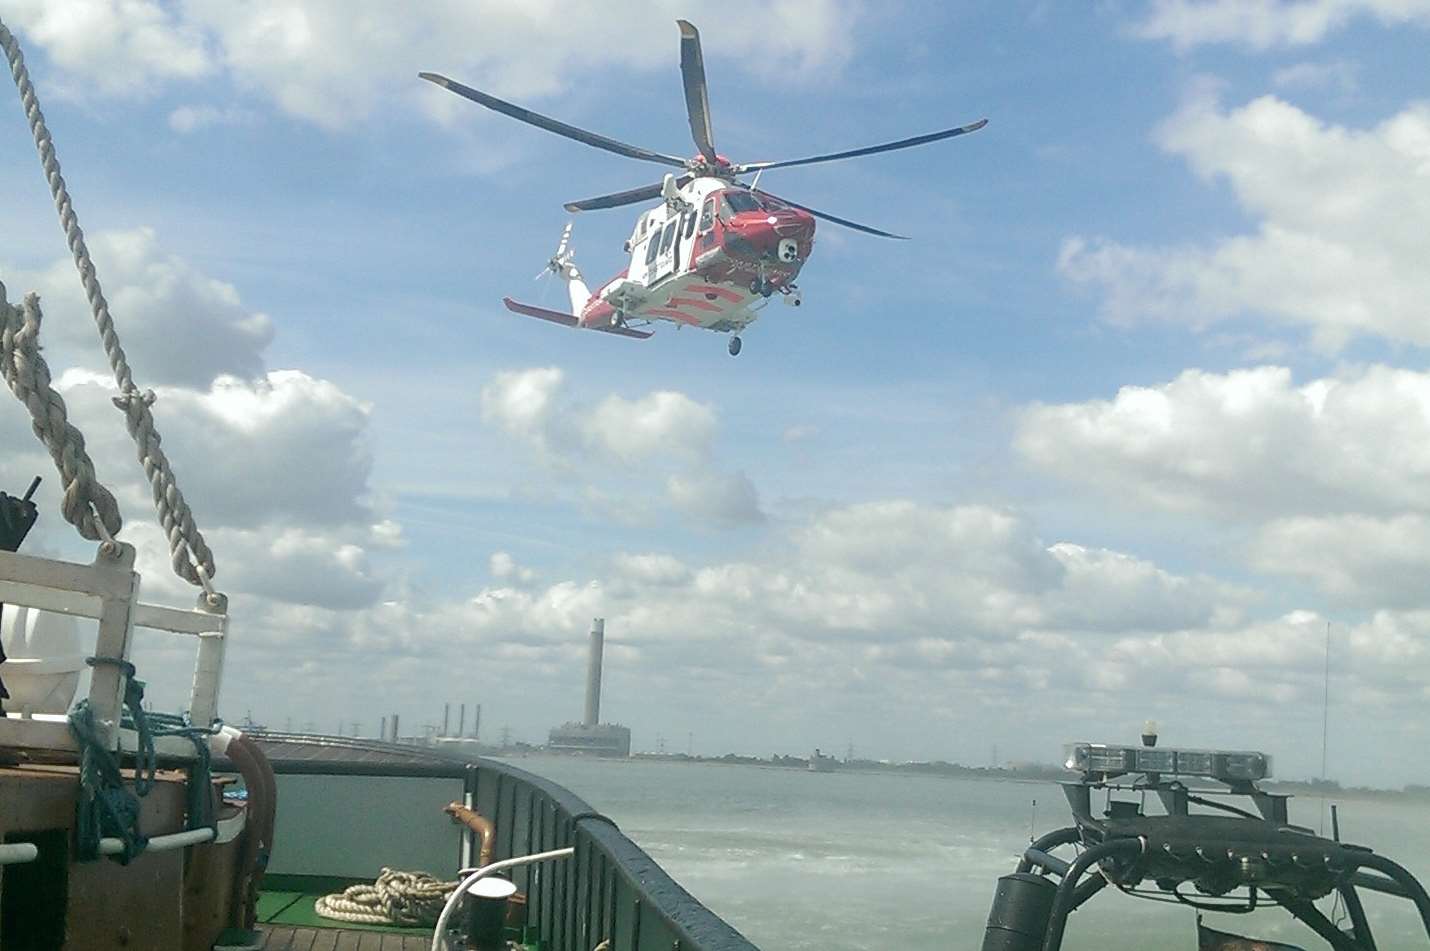 The coastguard helicopter hovers over the tug